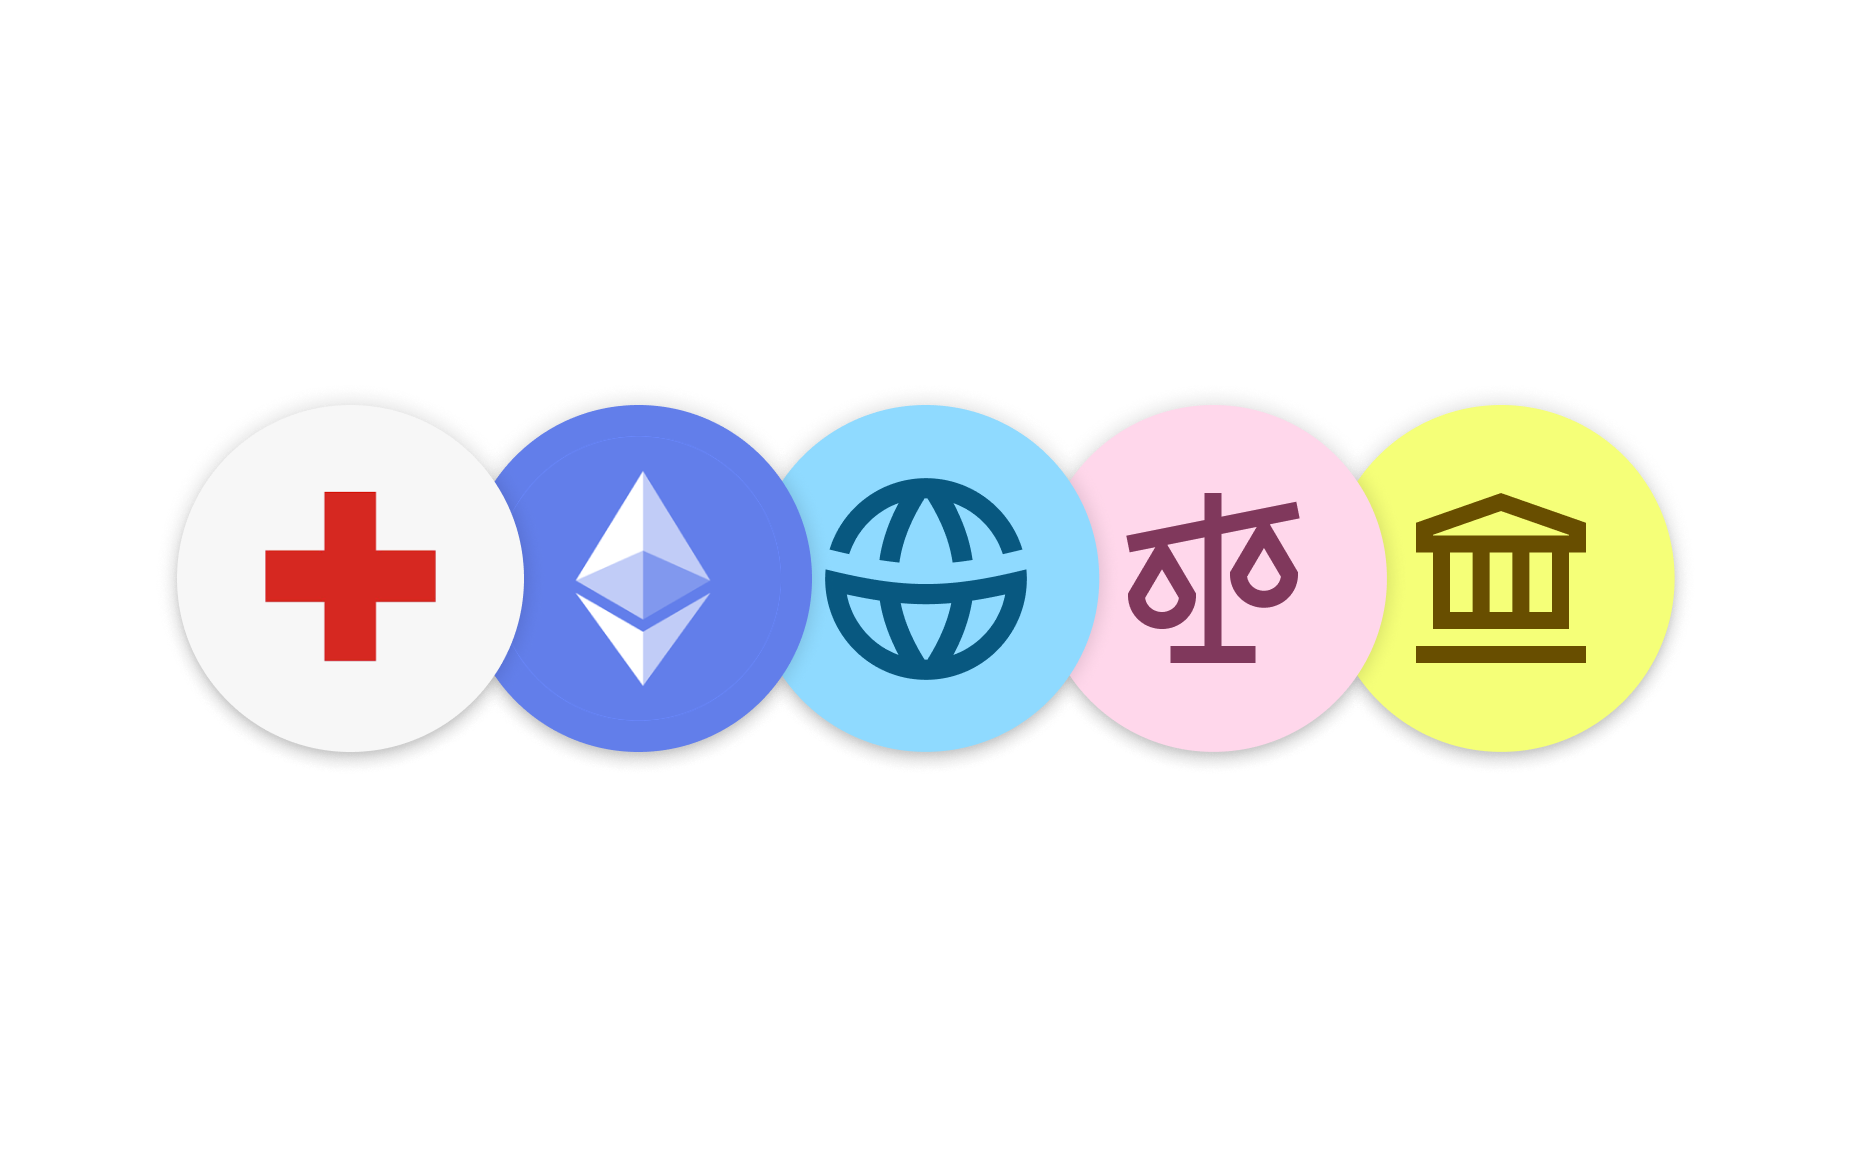 Nonprofit health, cryptocurrency, government, and news logos.